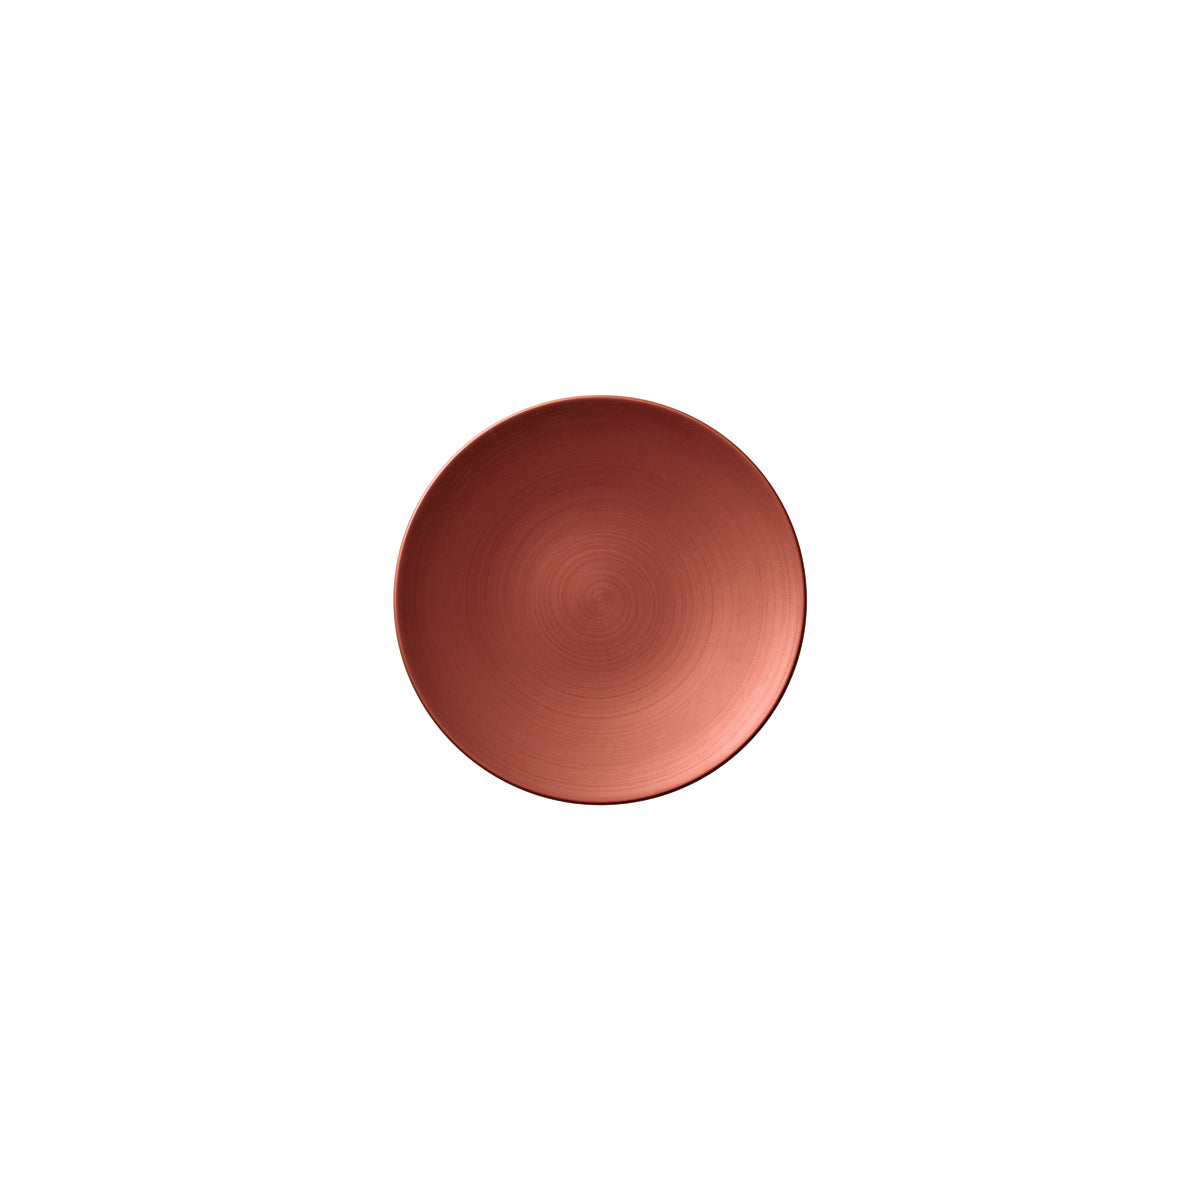 VB16-4070-2650 Villeroy And Boch Villeroy And Boch Copper Glow Coupe Plate 210mm Tomkin Australia Hospitality Supplies